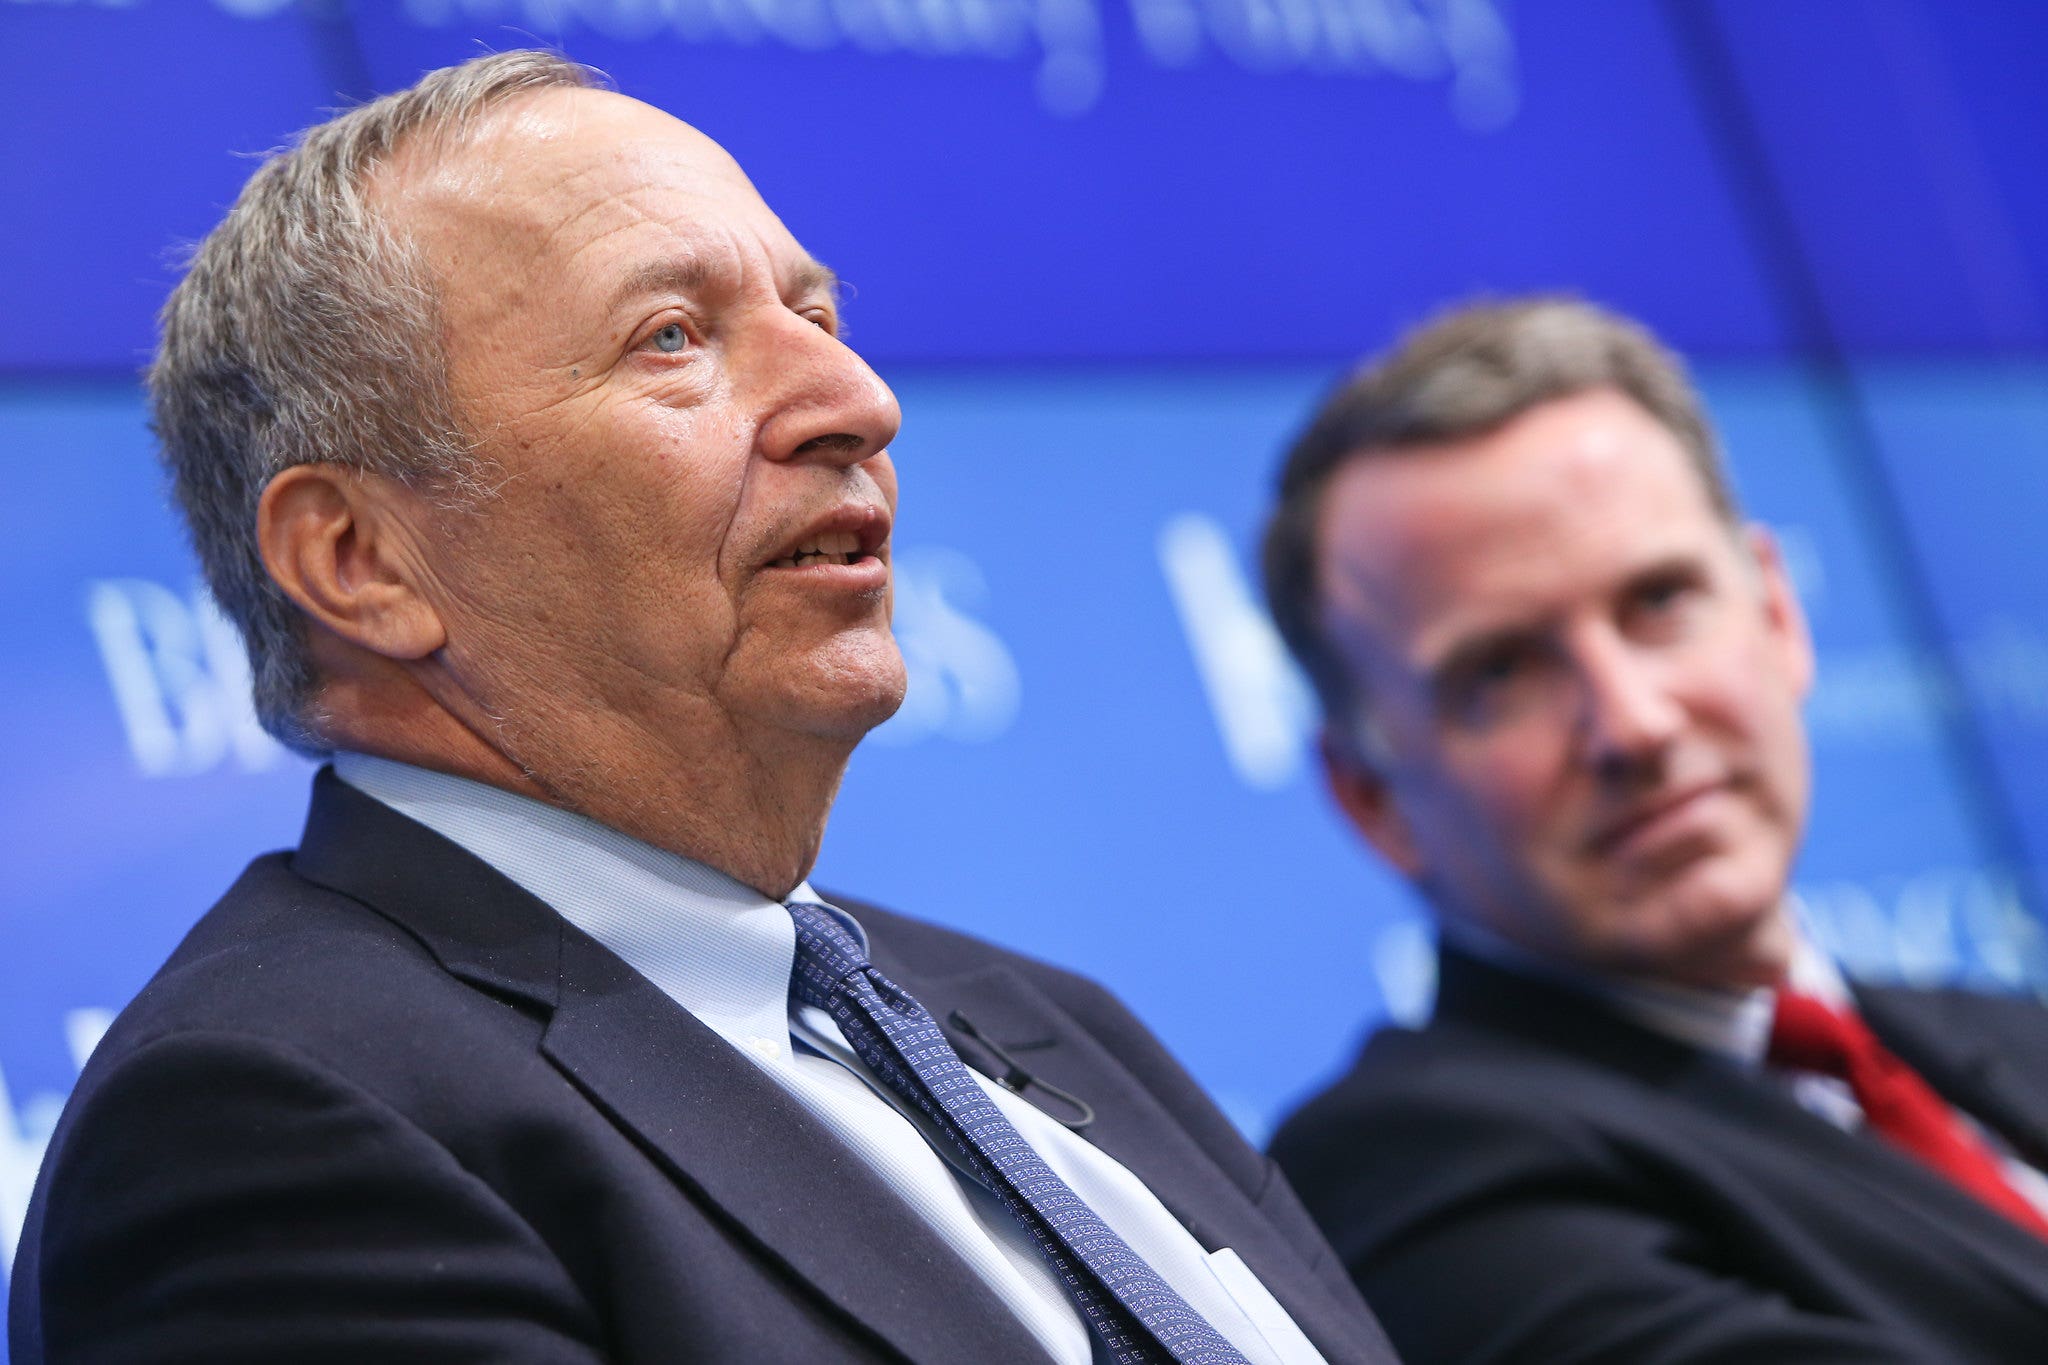 Larry Summers Says Fed Should Stay On Its Course: Pausing Tightening 'Badly Misguided Advice'